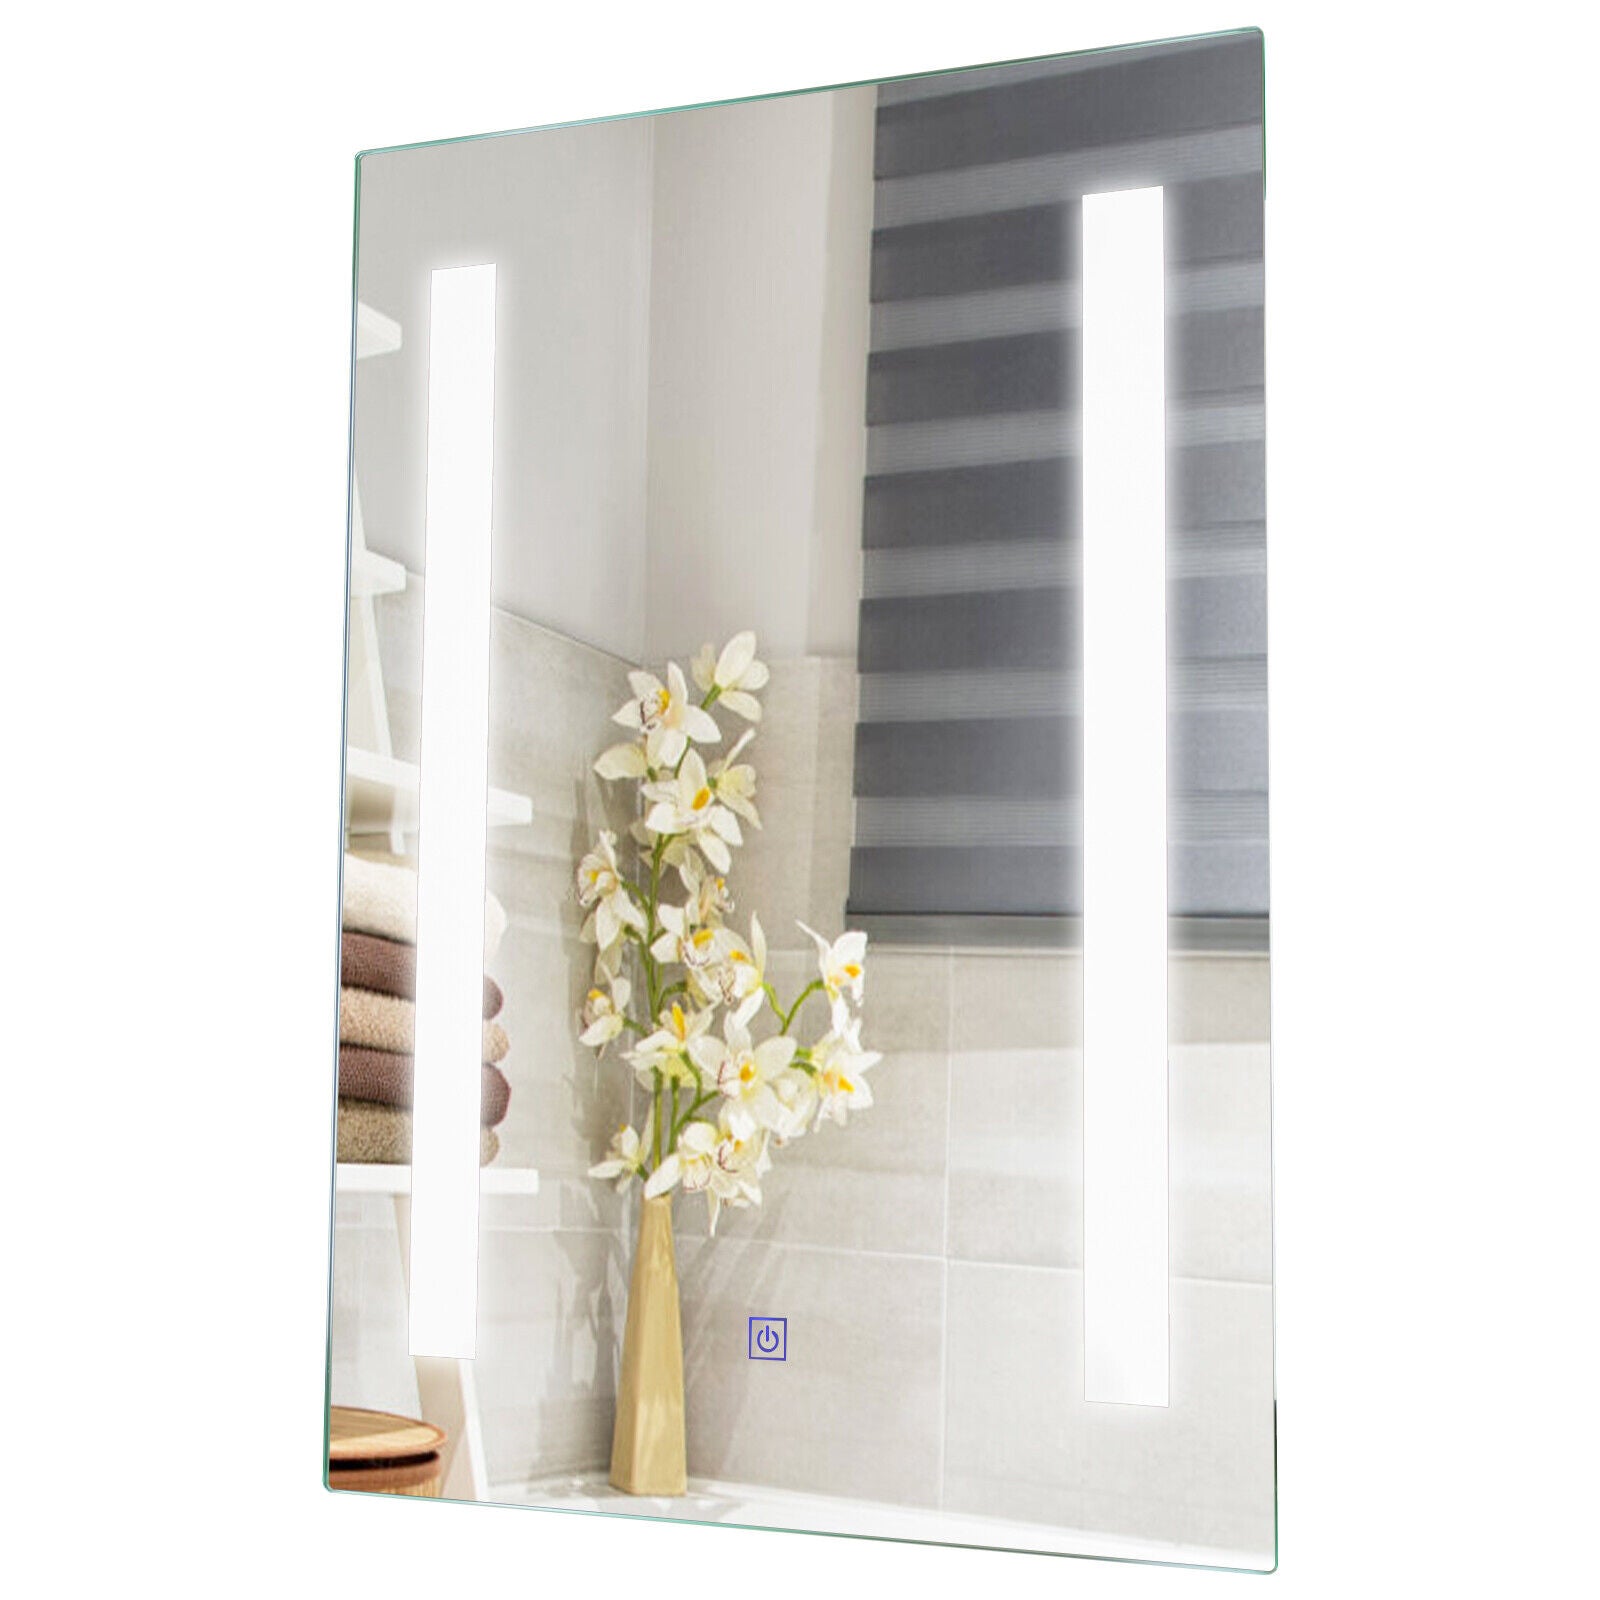 Mirrors - 27.5 by 20 Inches Wall Mounted 3 Color Bathroom Mirror